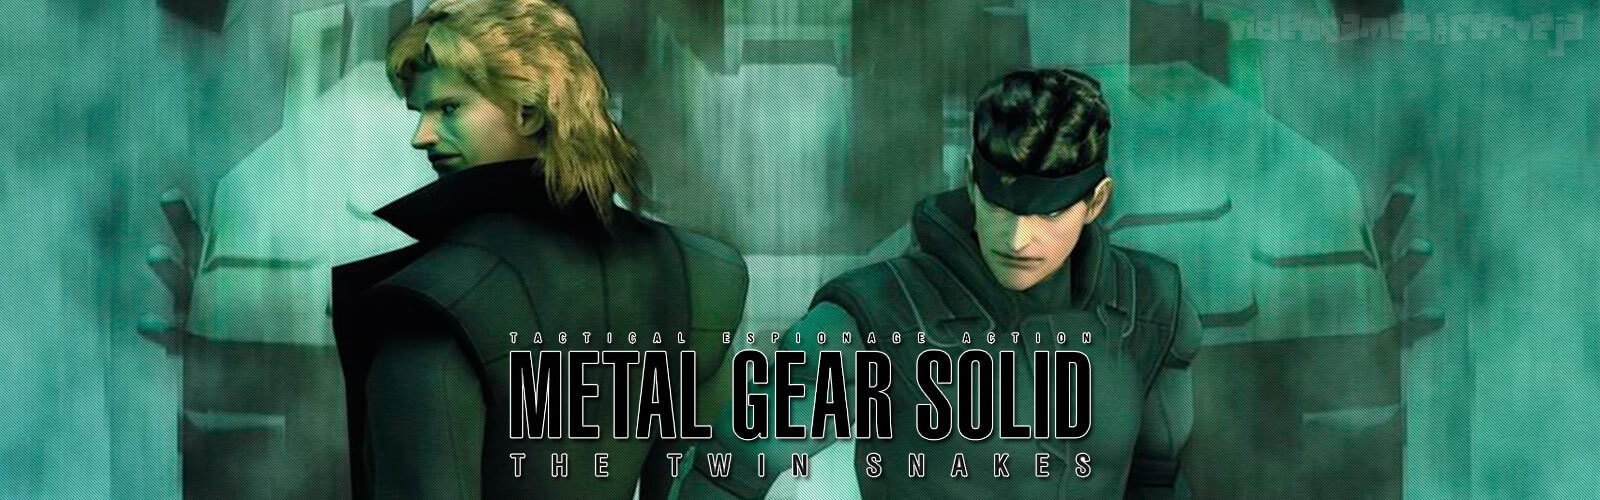 Análise - Metal Gear Solid: The Twin Snakes Cover